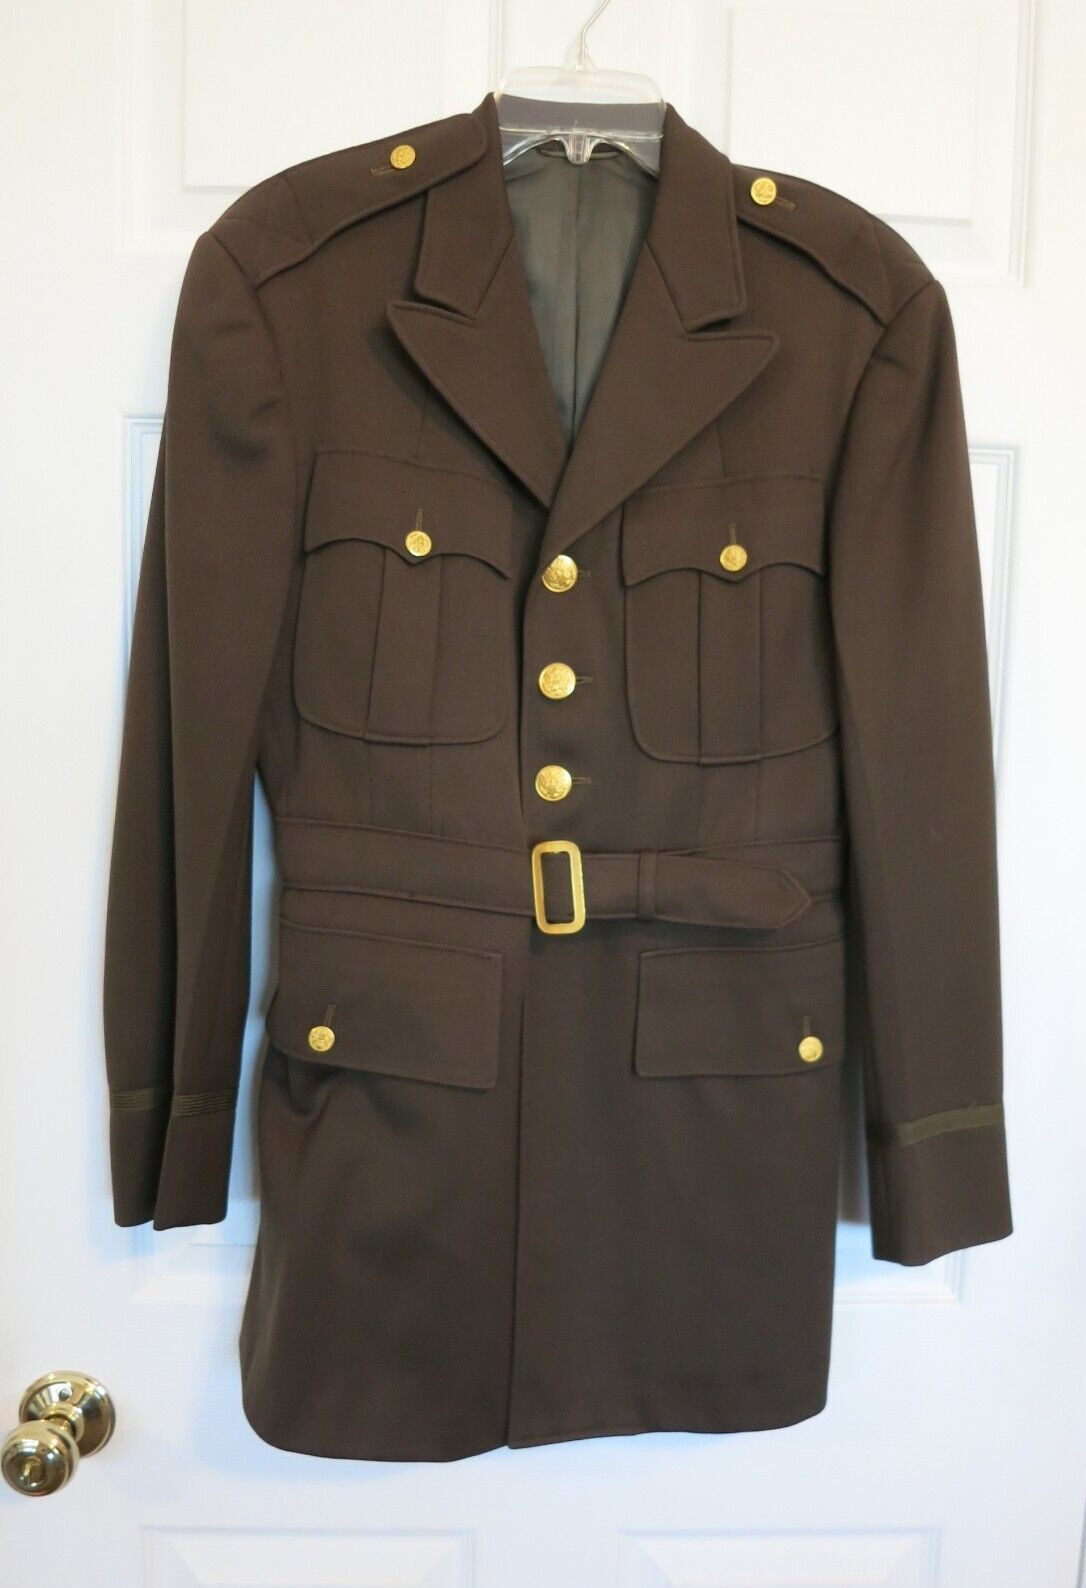 ORIGINAL WWII US ARMY OFFICER CLASS A DRESS JACKET- dated 9/28/44